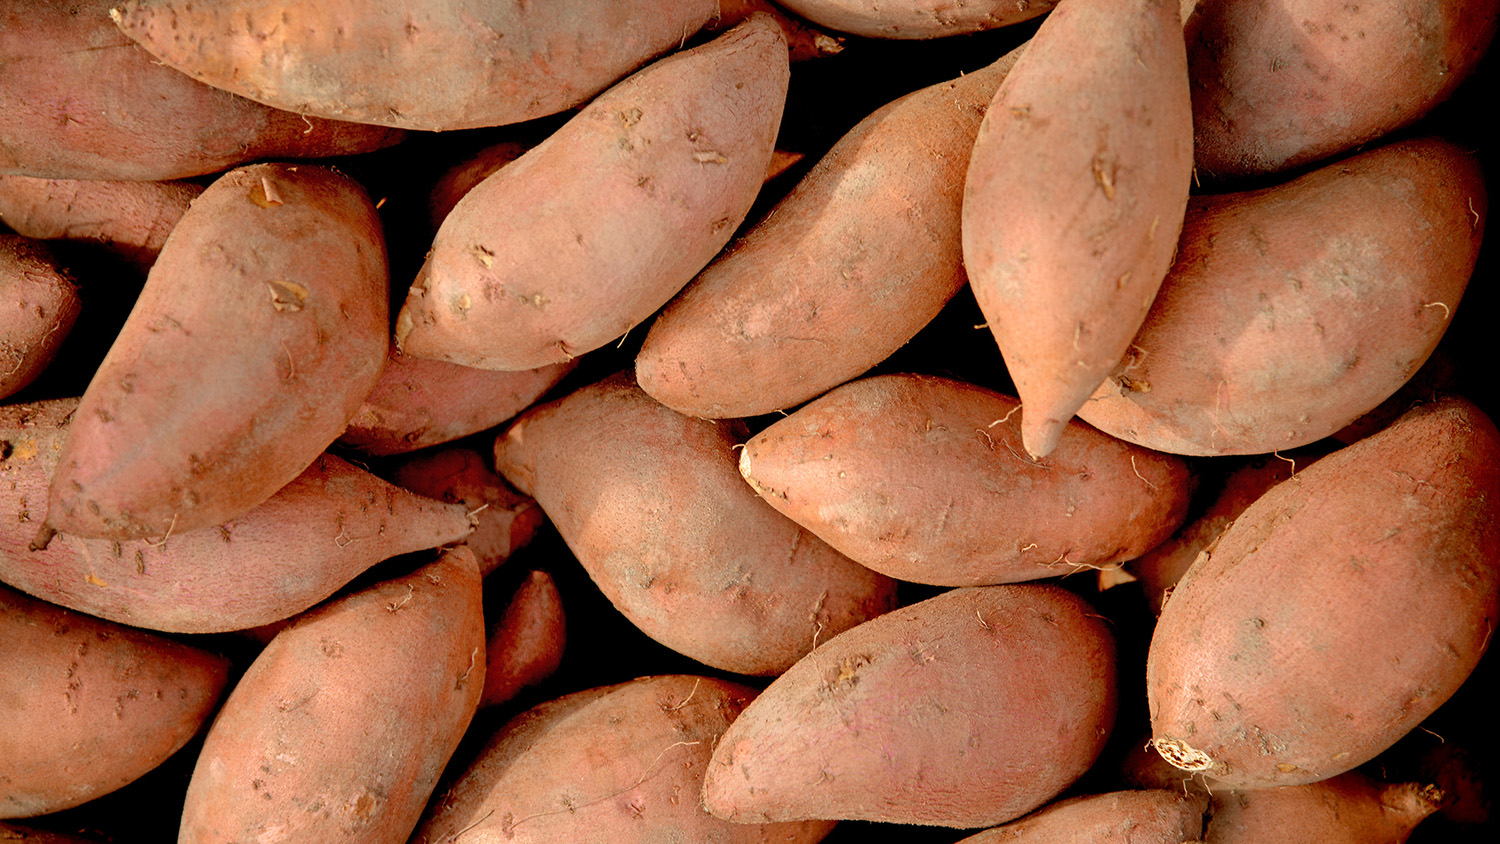 Sweet potatoes for sale at the North Carolina State Farmer's Market in the Fall.